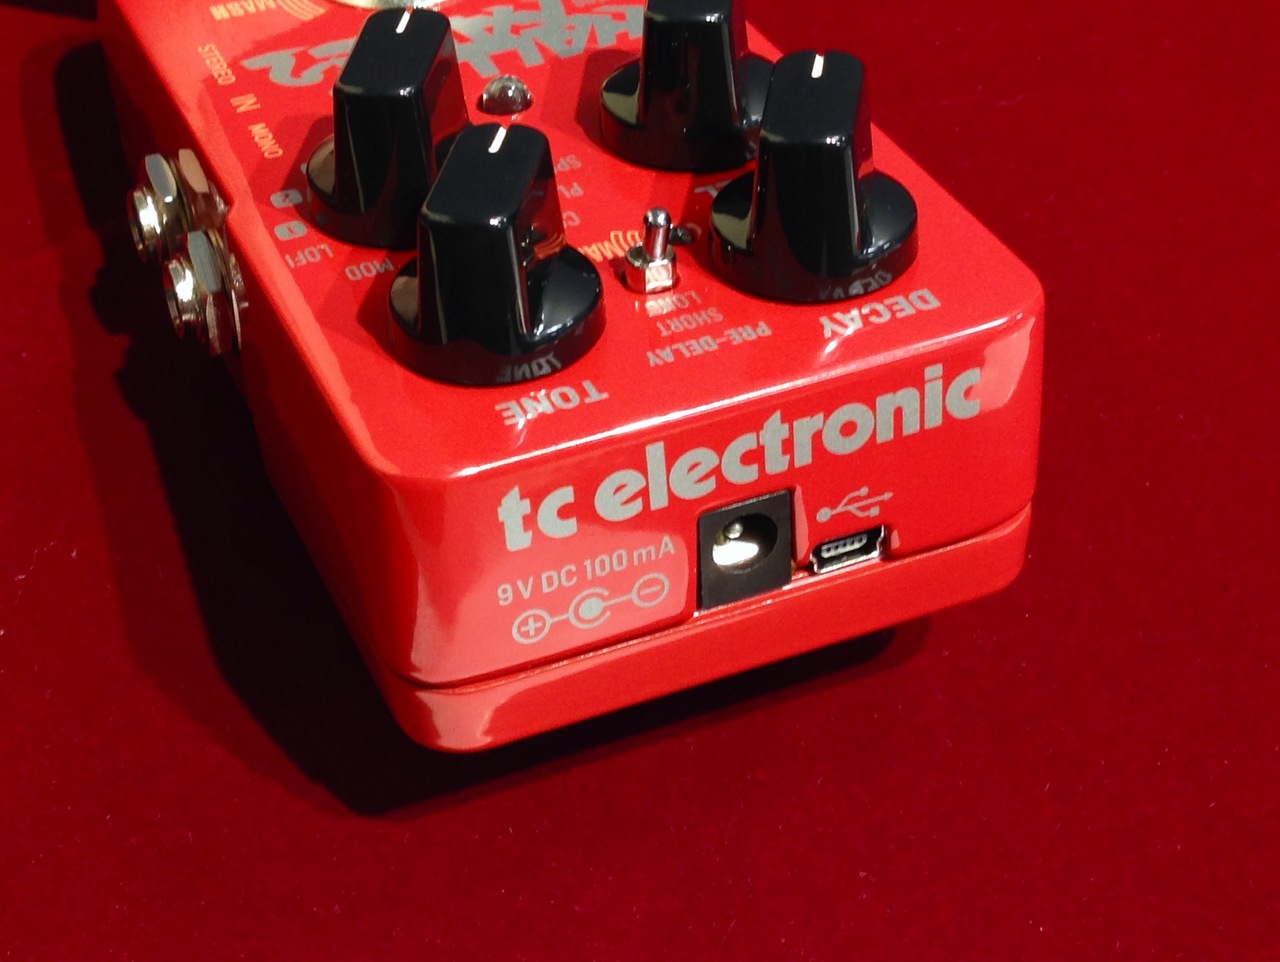 tc electronic Hall Of Fame 2 Reverb 【正規輸入品】